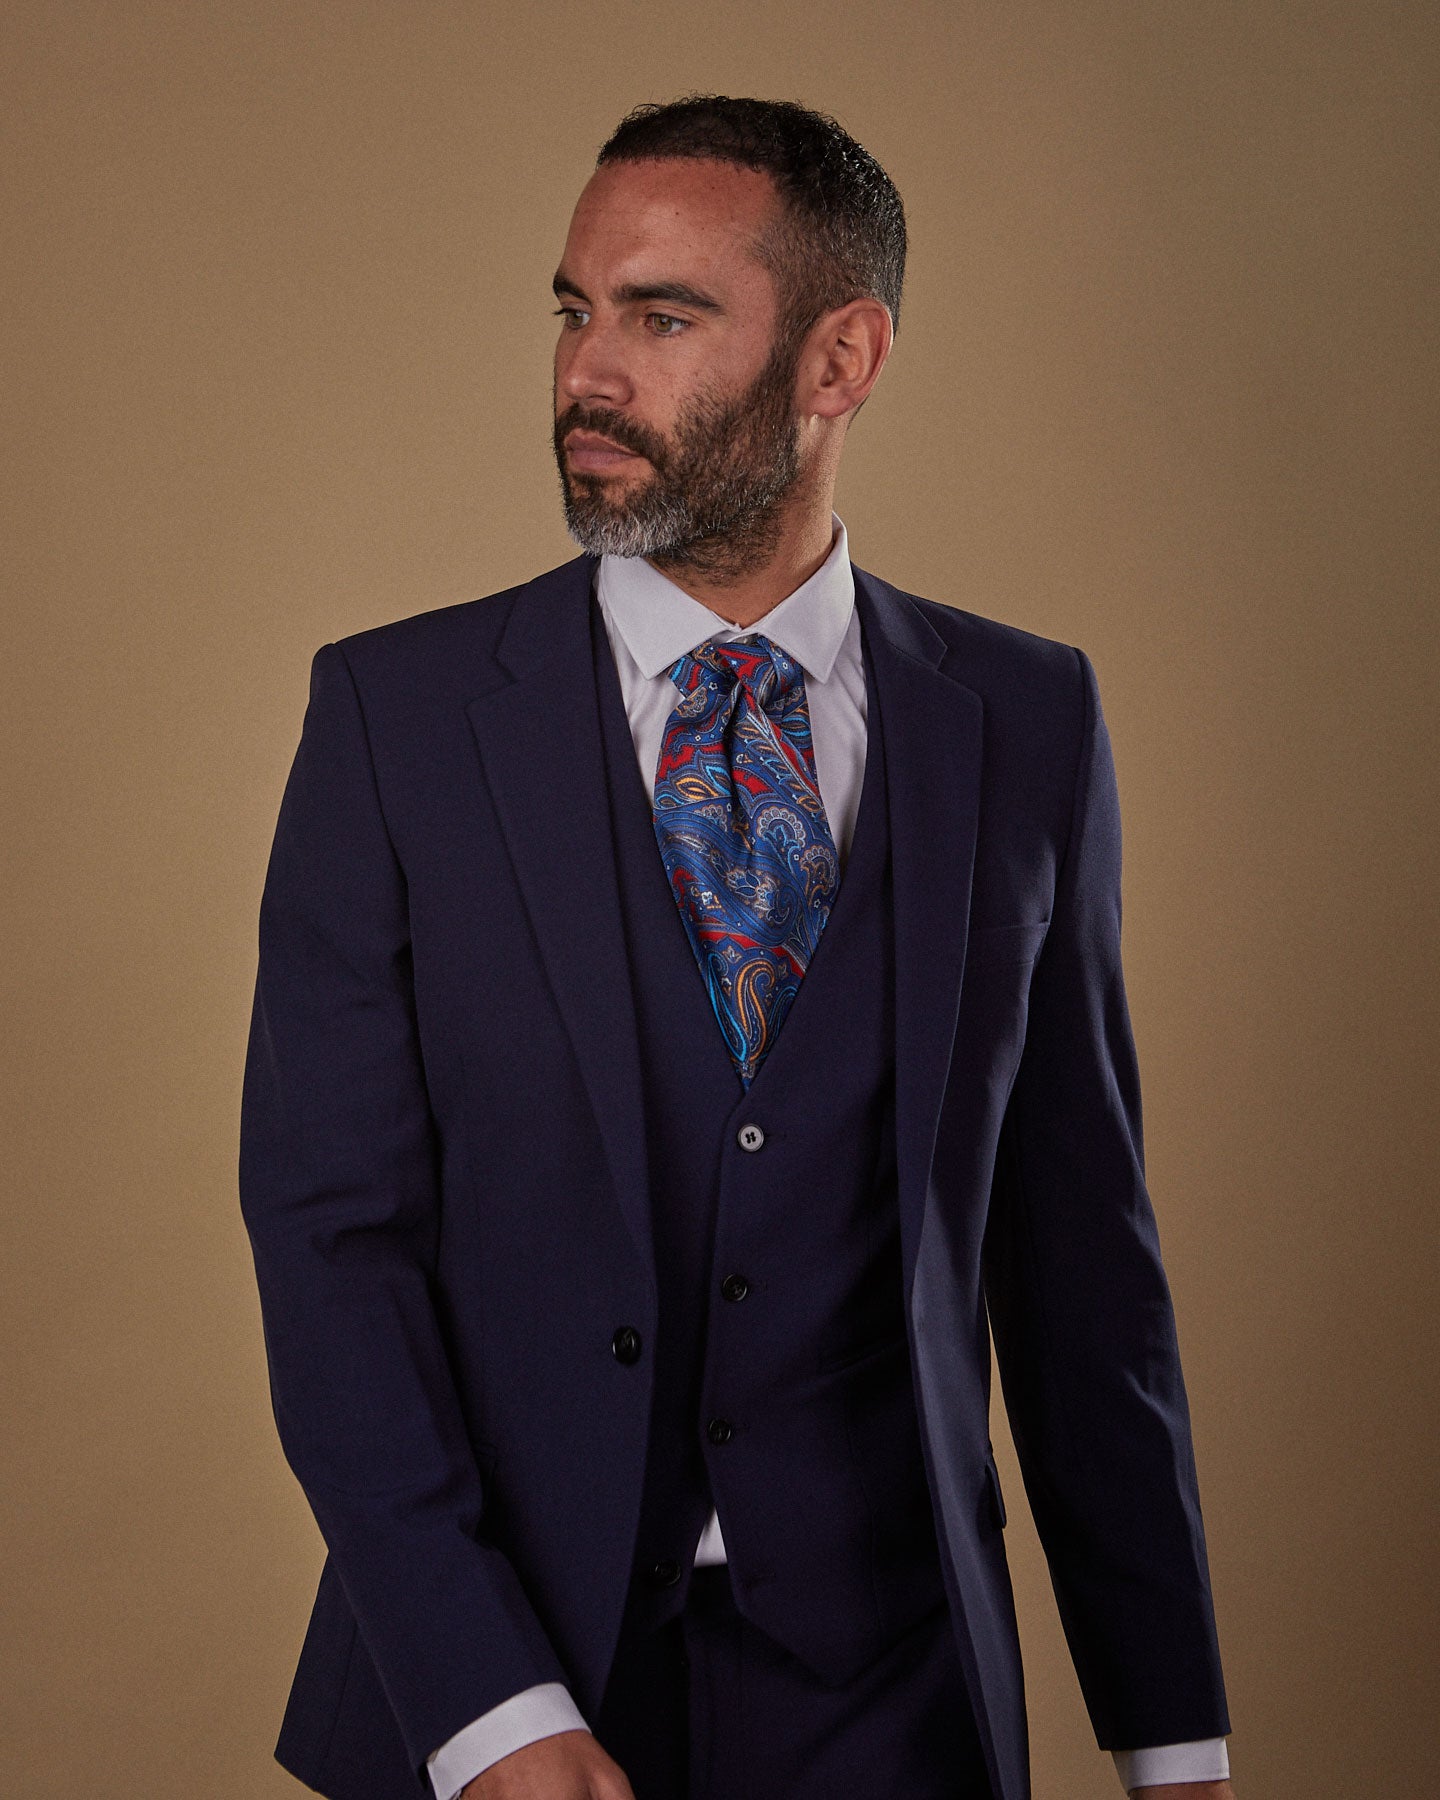 Walking pose, wearing an Oxford silk Double Ascot tie from SOHO Scarves, paired with white shirt and three-piece midnight blue suit.